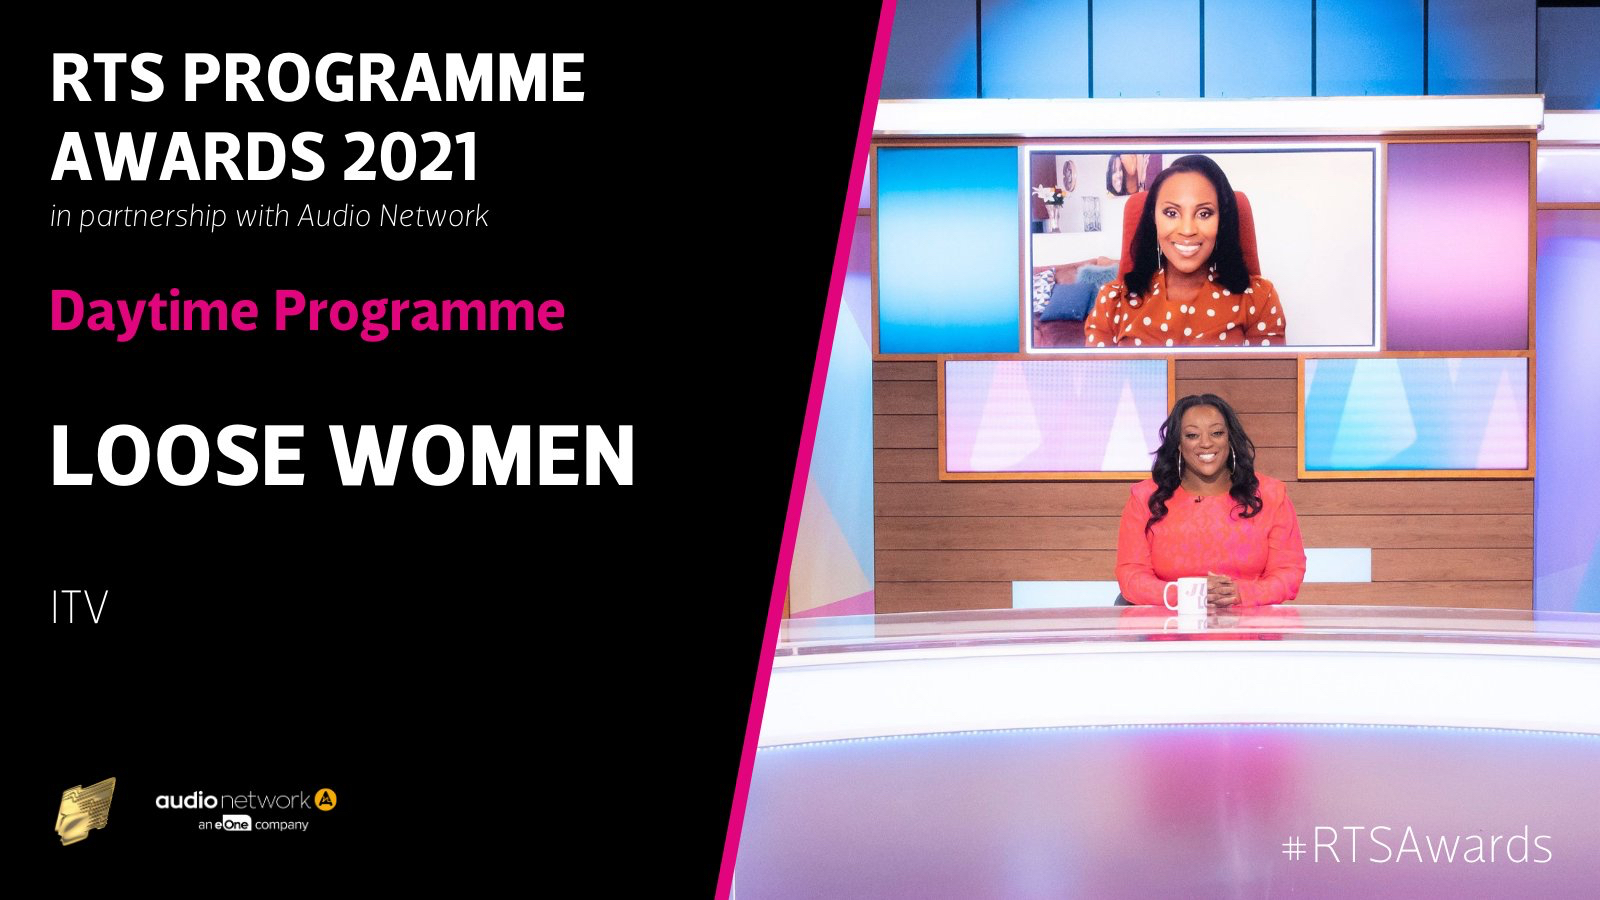 Loose Women wins RTS Award for ‘Best Daytime Programme’